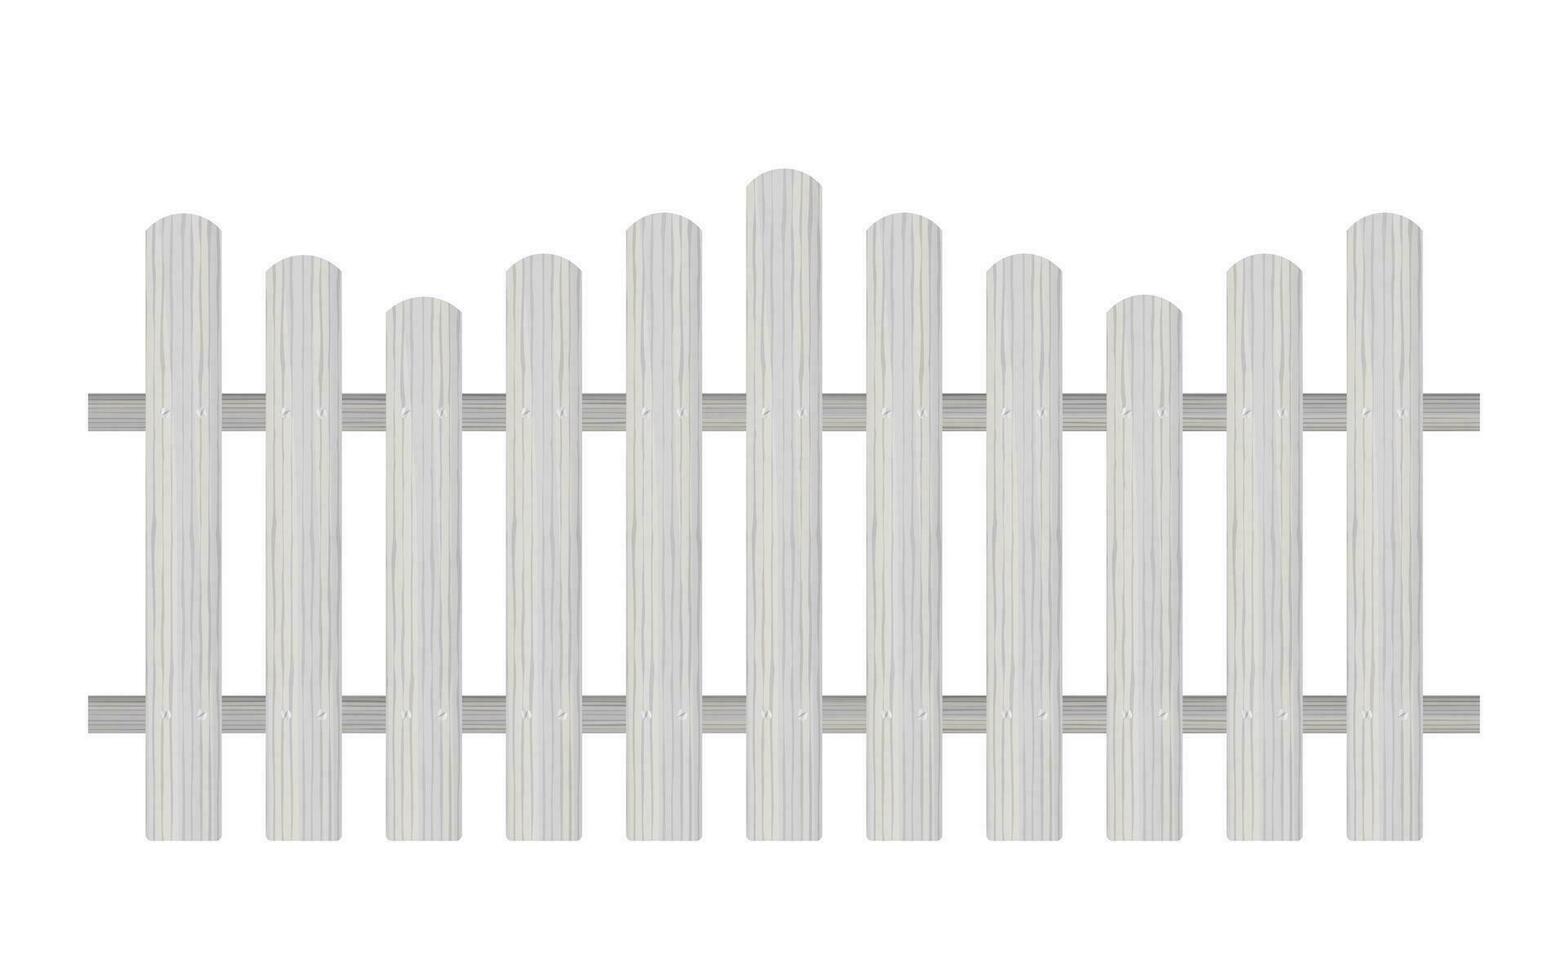 Picket fence, wooden textured, rounded edges. Vector stock illustration.